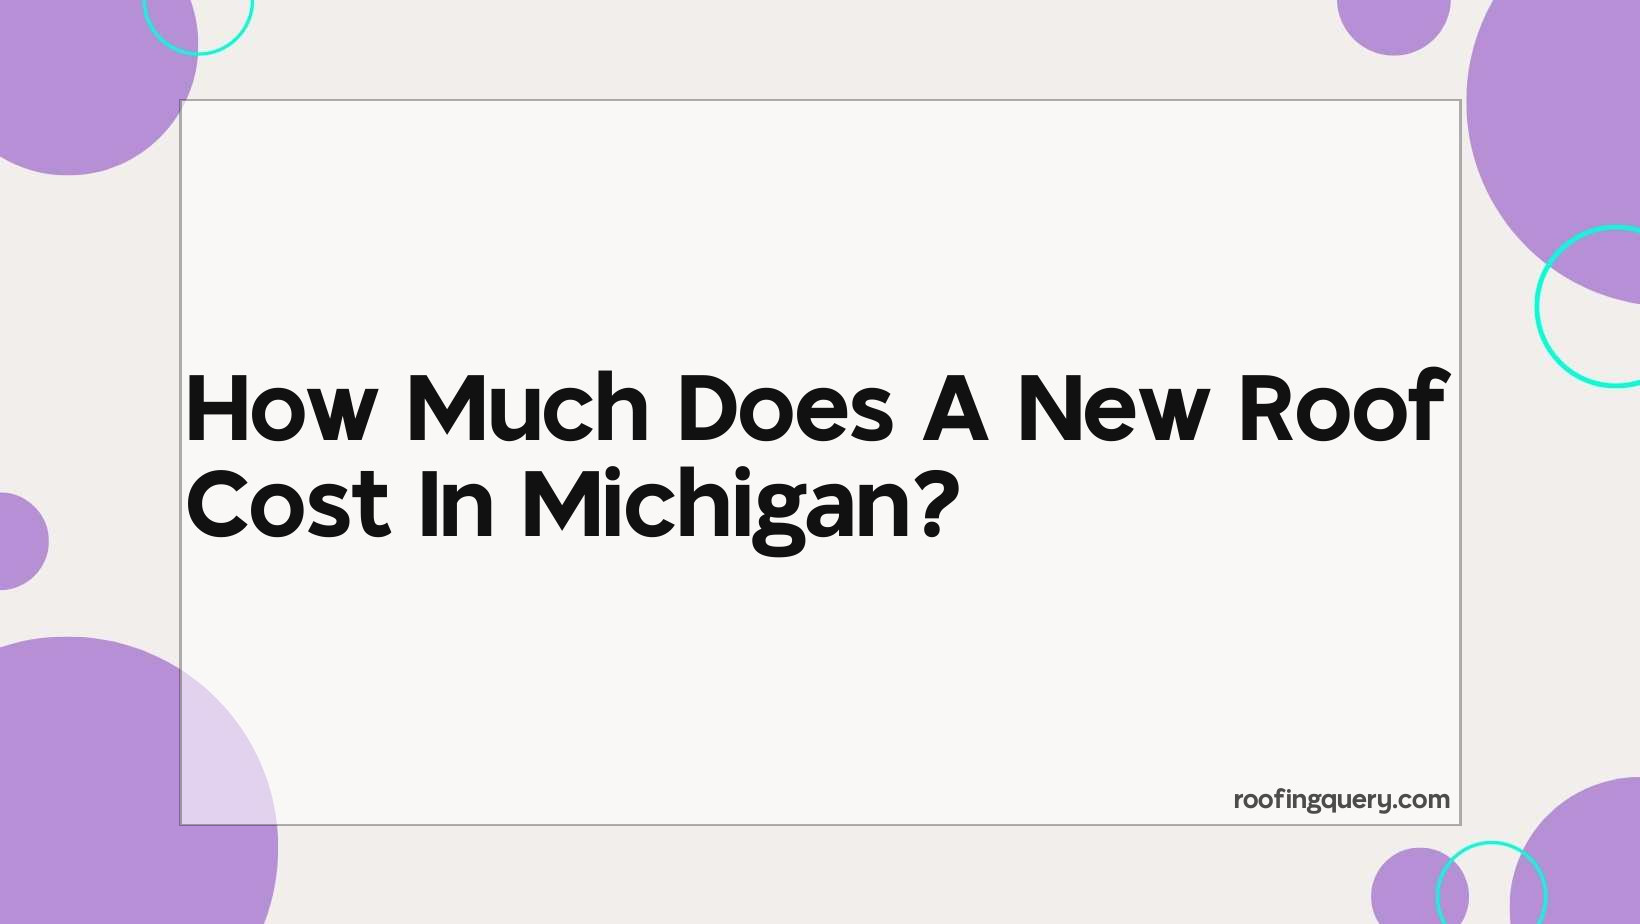 How Much Does A New Roof Cost In Michigan?